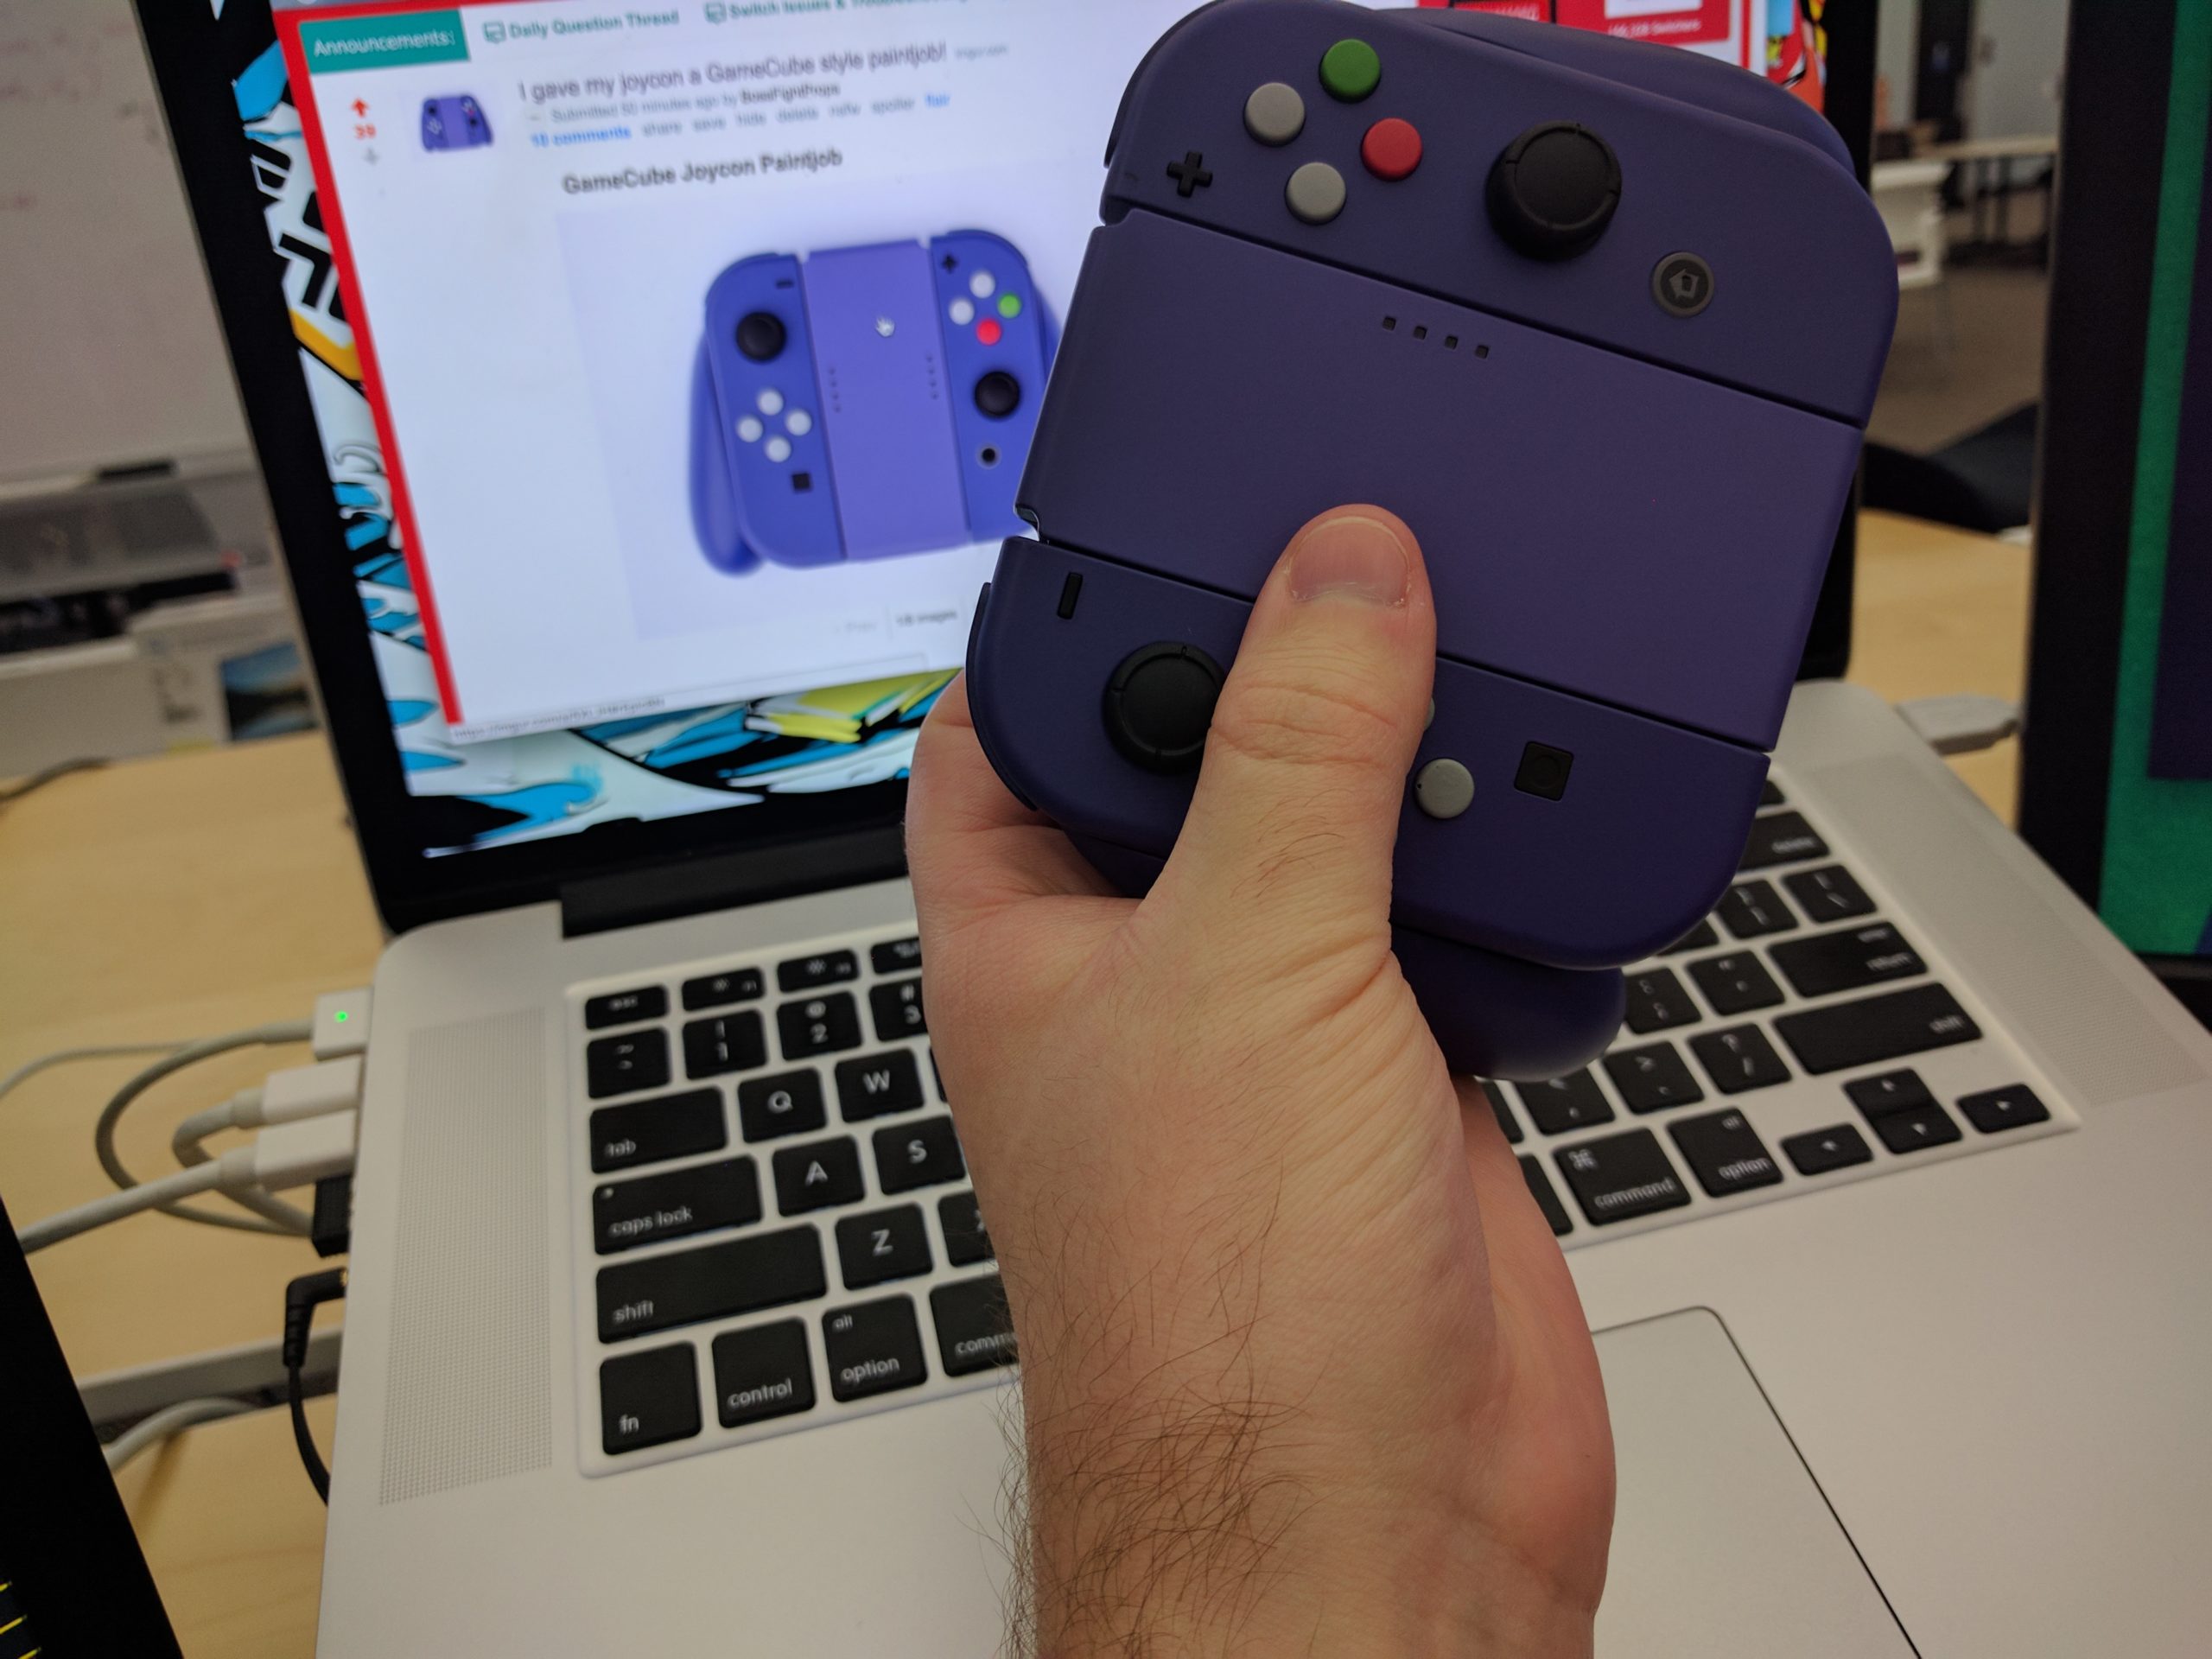 Switch Controller Cosplays As GameCube Pad